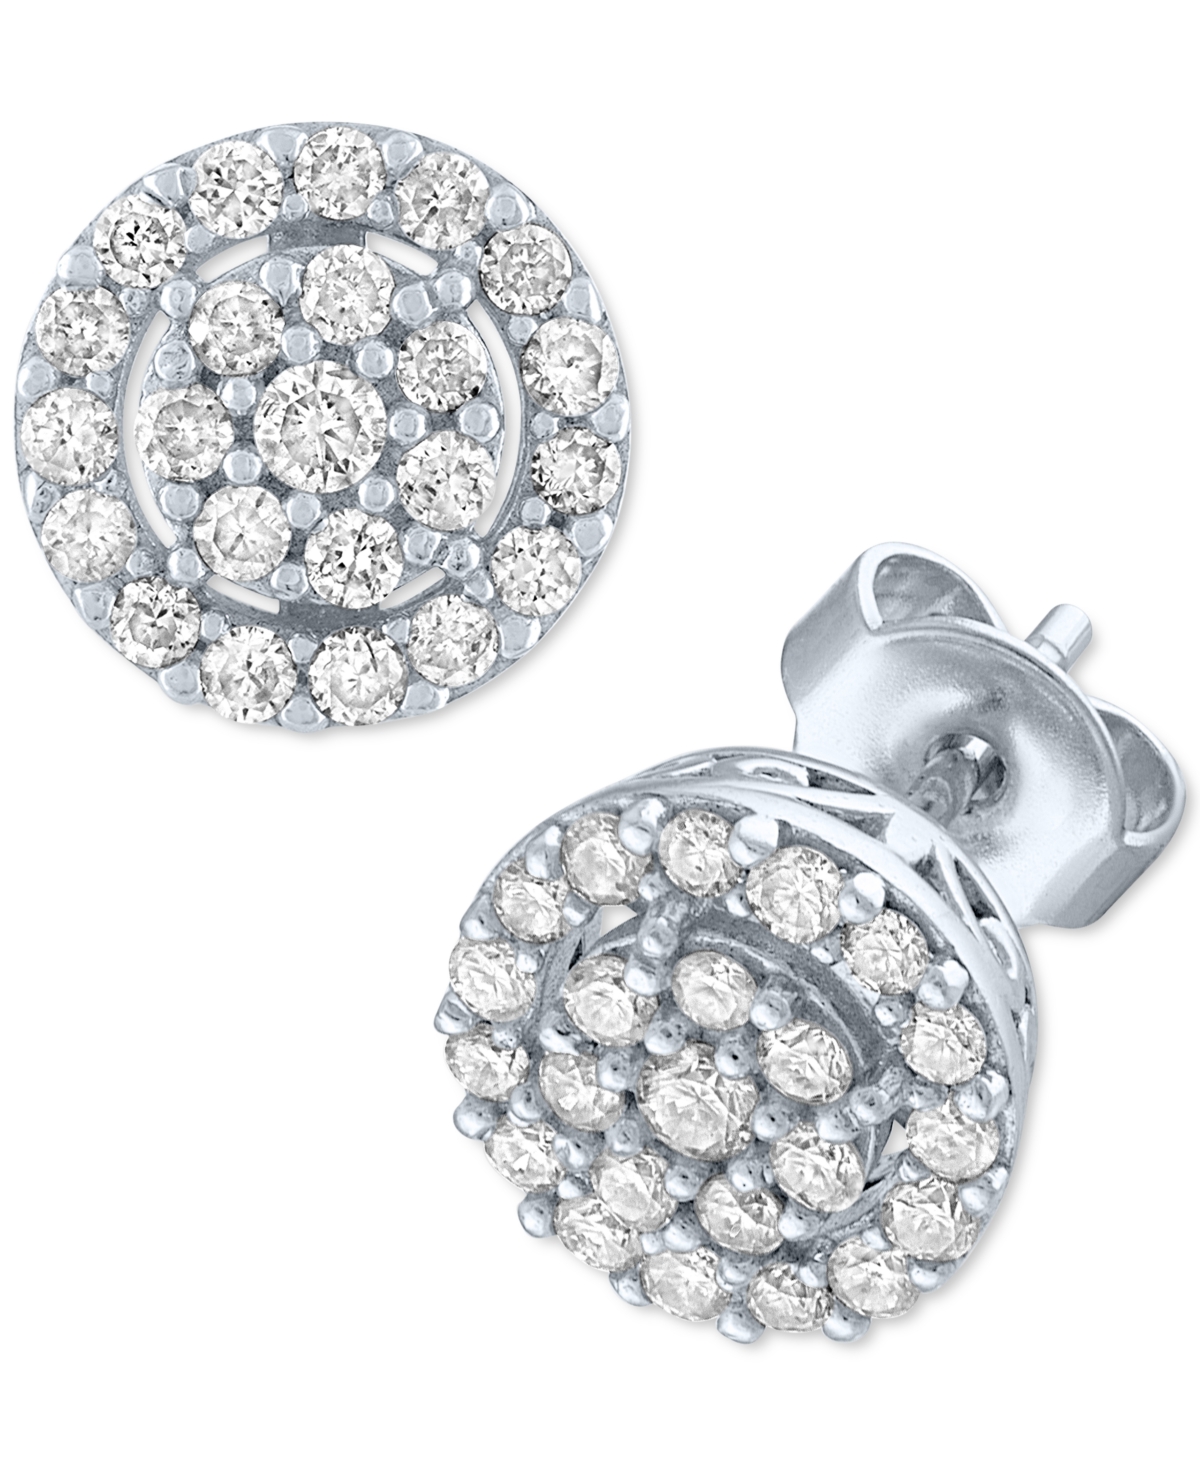 Lab-Created Diamond Halo Cluster Stud Earrings (1/2 ct. t.w.) in Sterling Silver - Sterling Silver